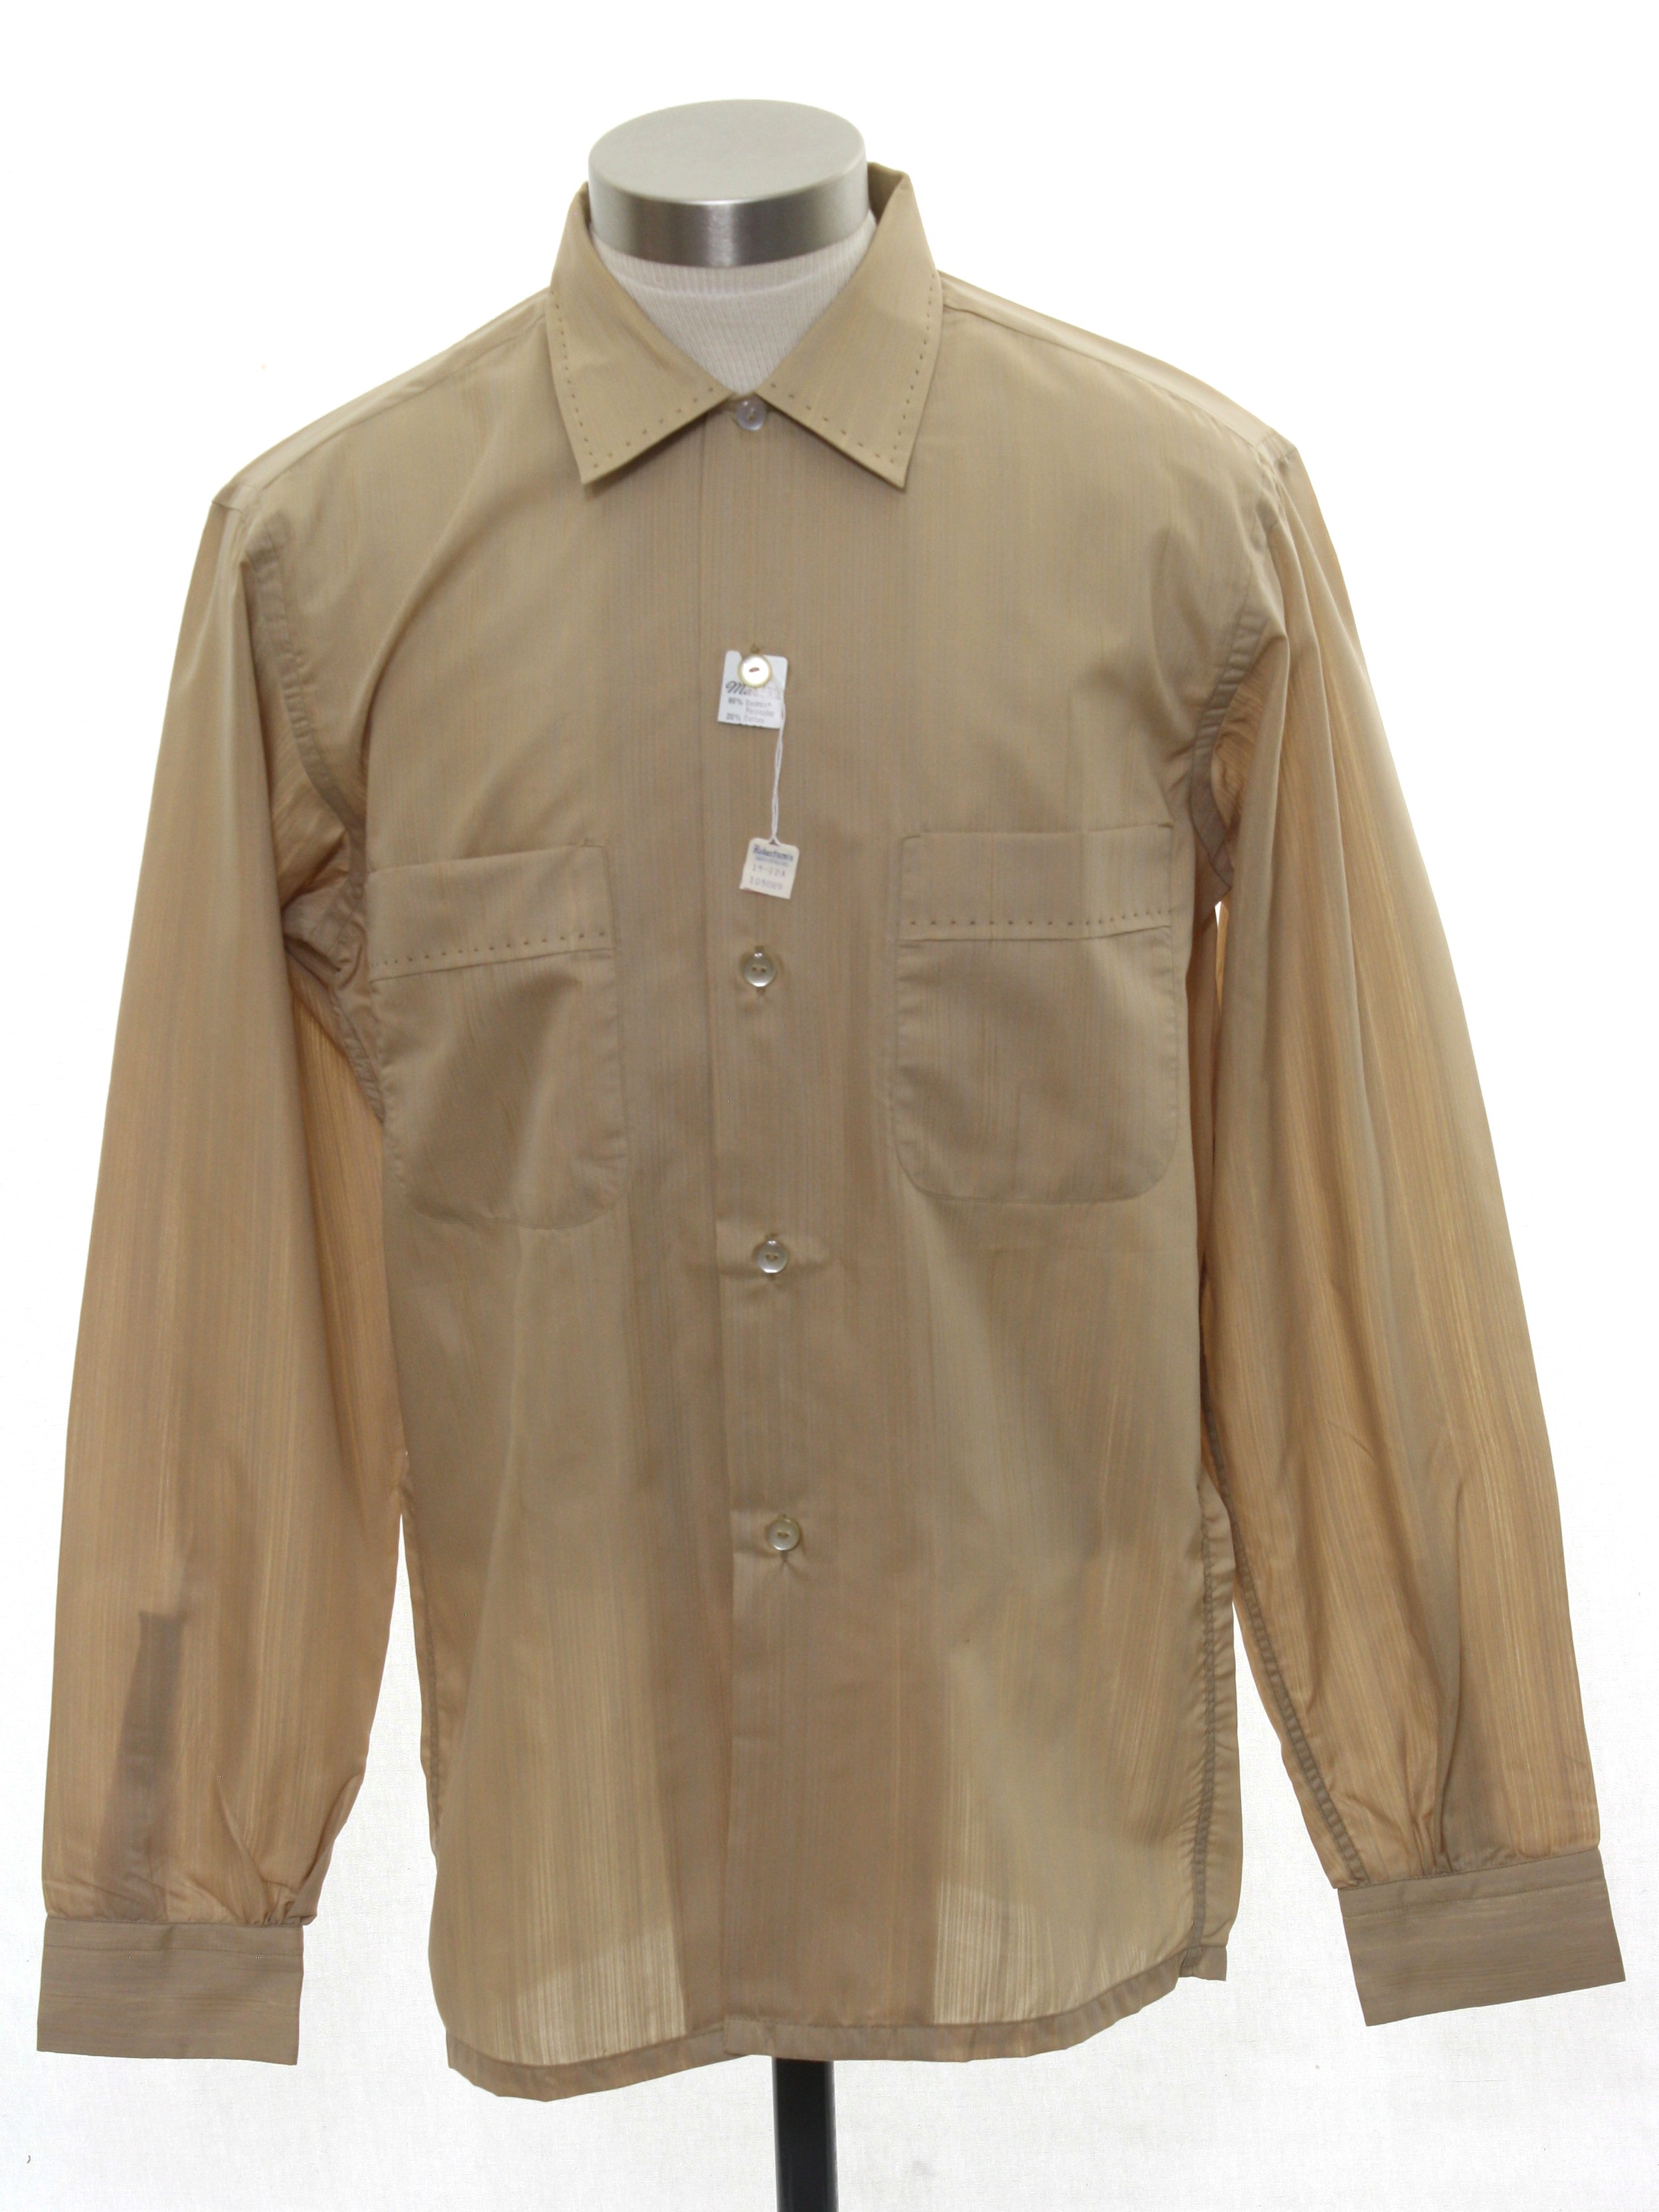 Vintage 1960's Shirt: Early 60s -Mark Vii Casualwear- Mens heather ...